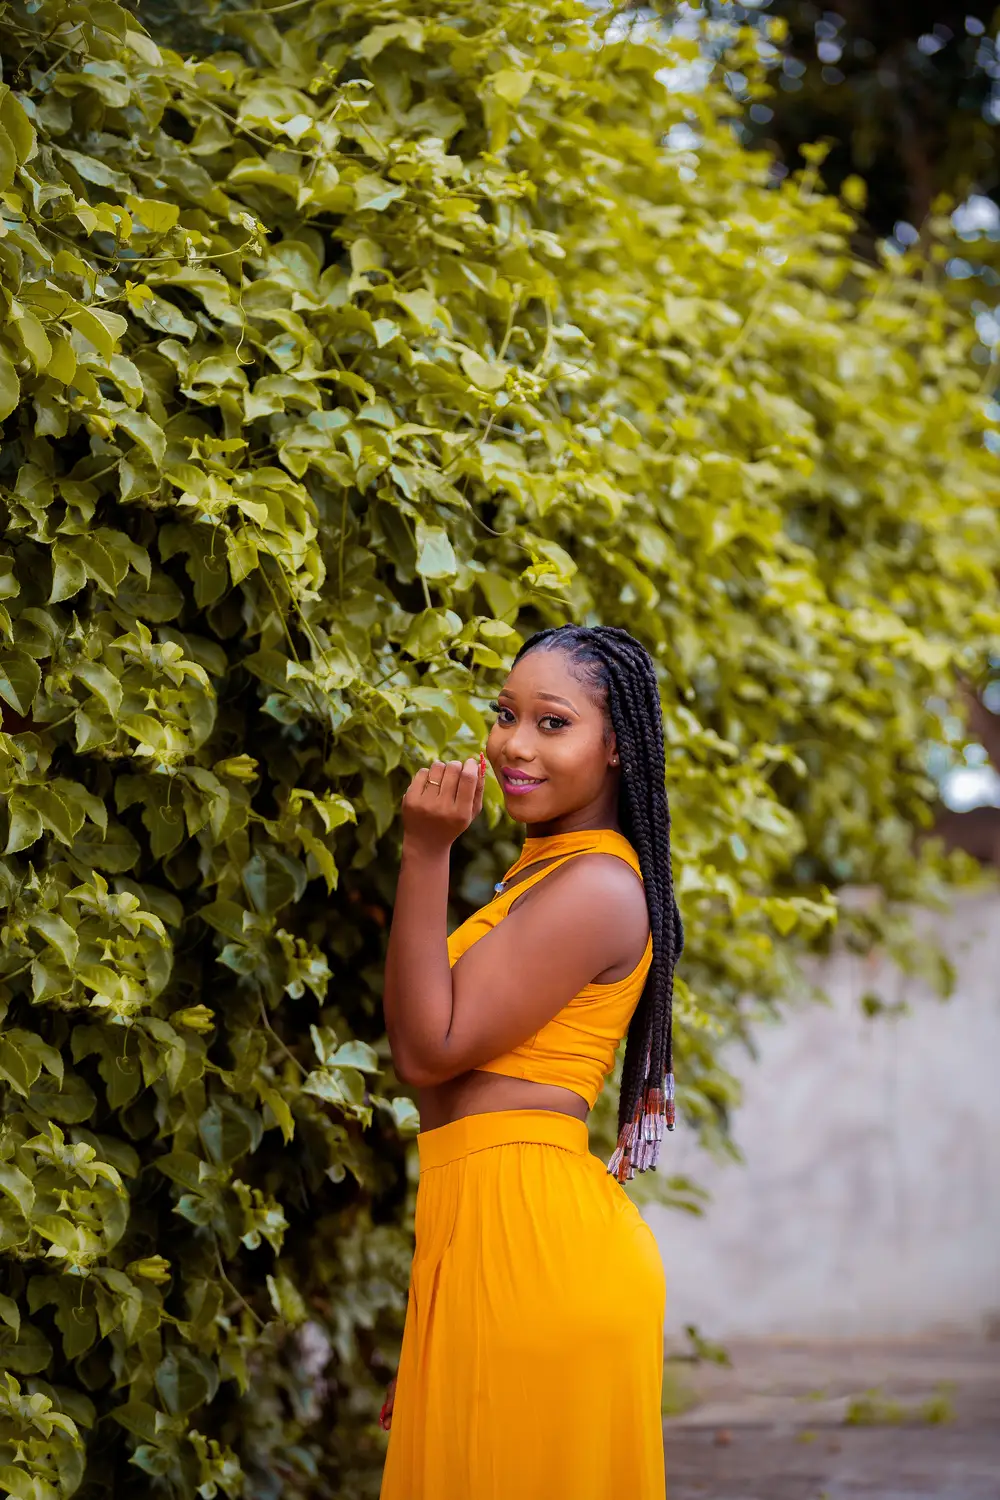 Pretty lady on long braids and yellow outfit.